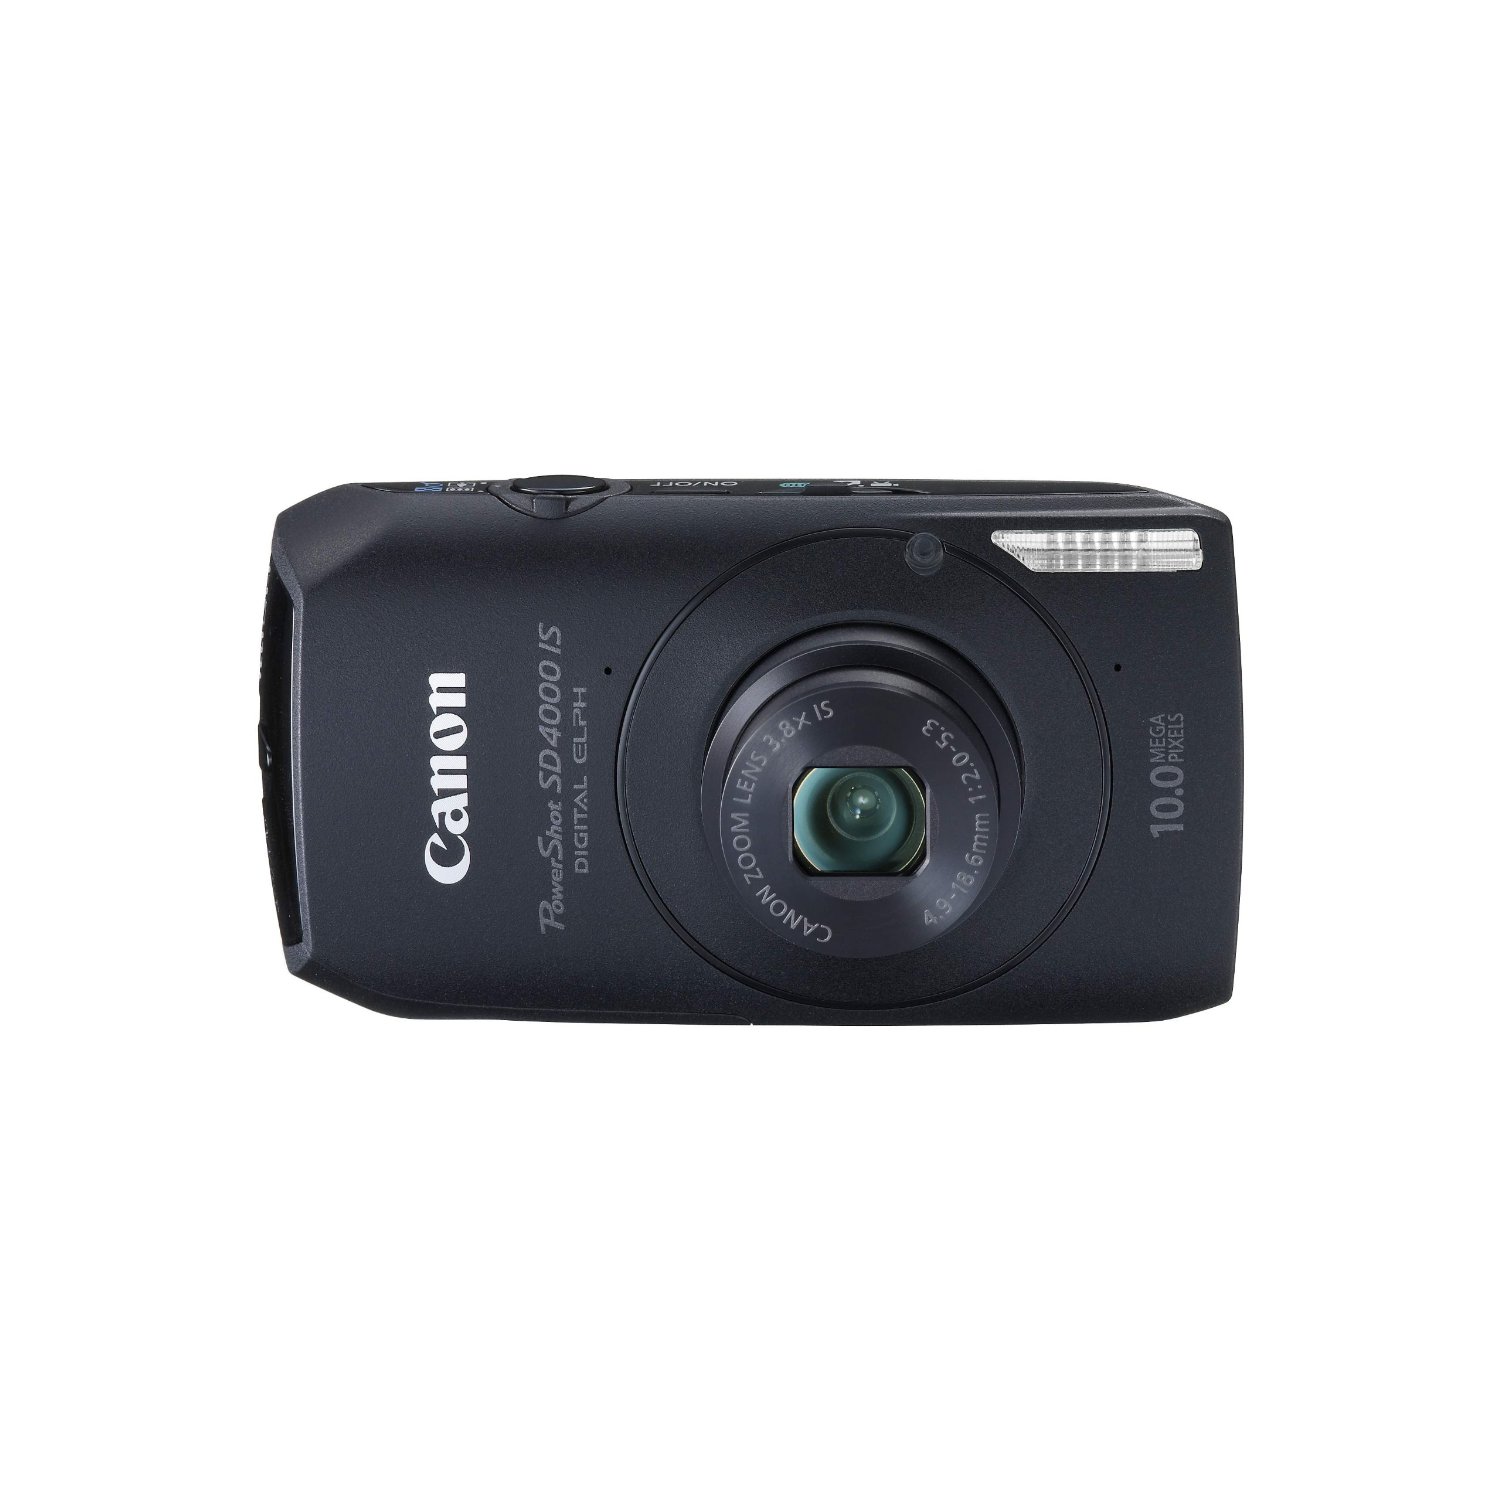 http://thetechjournal.com/wp-content/uploads/images/1109/1316083020-canon-powershot-sd4000is-10-mp-cmos-digital-camera-4.jpg